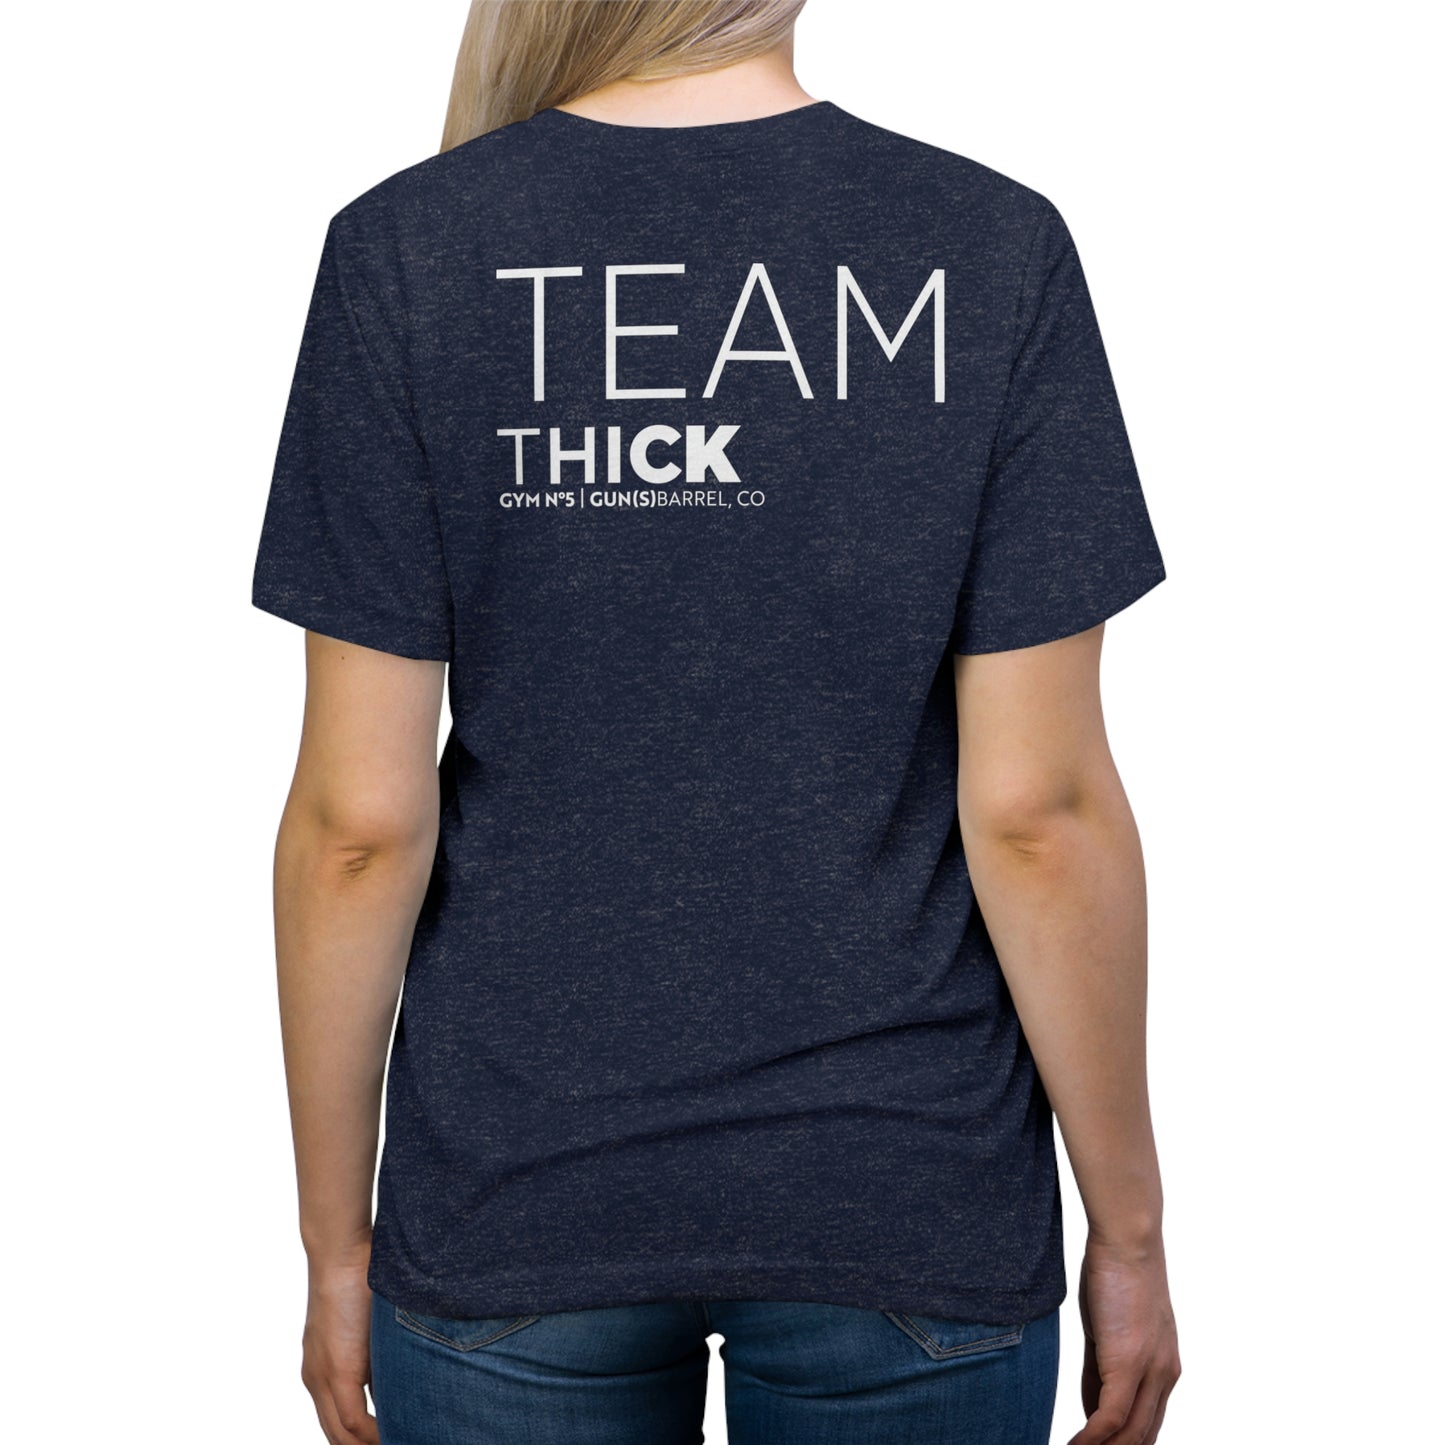 TEAM THICK 'WINGS' Unisex Triblend Tee